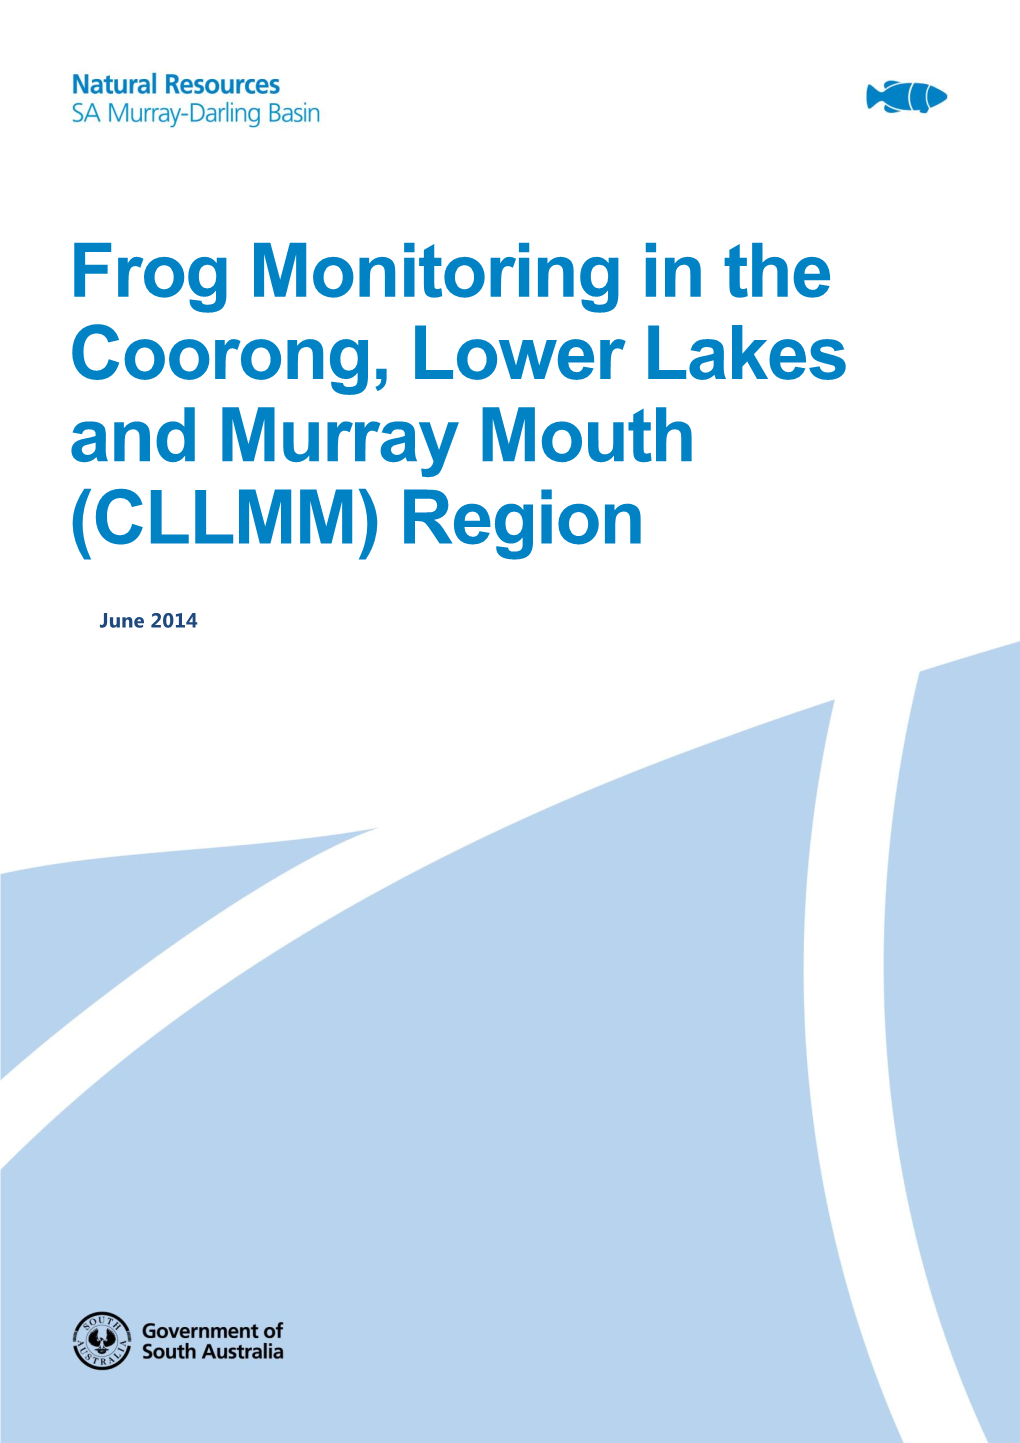 Frog Monitoring in the Coorong, Lower Lakes and Murray Mouth (CLLMM) Region